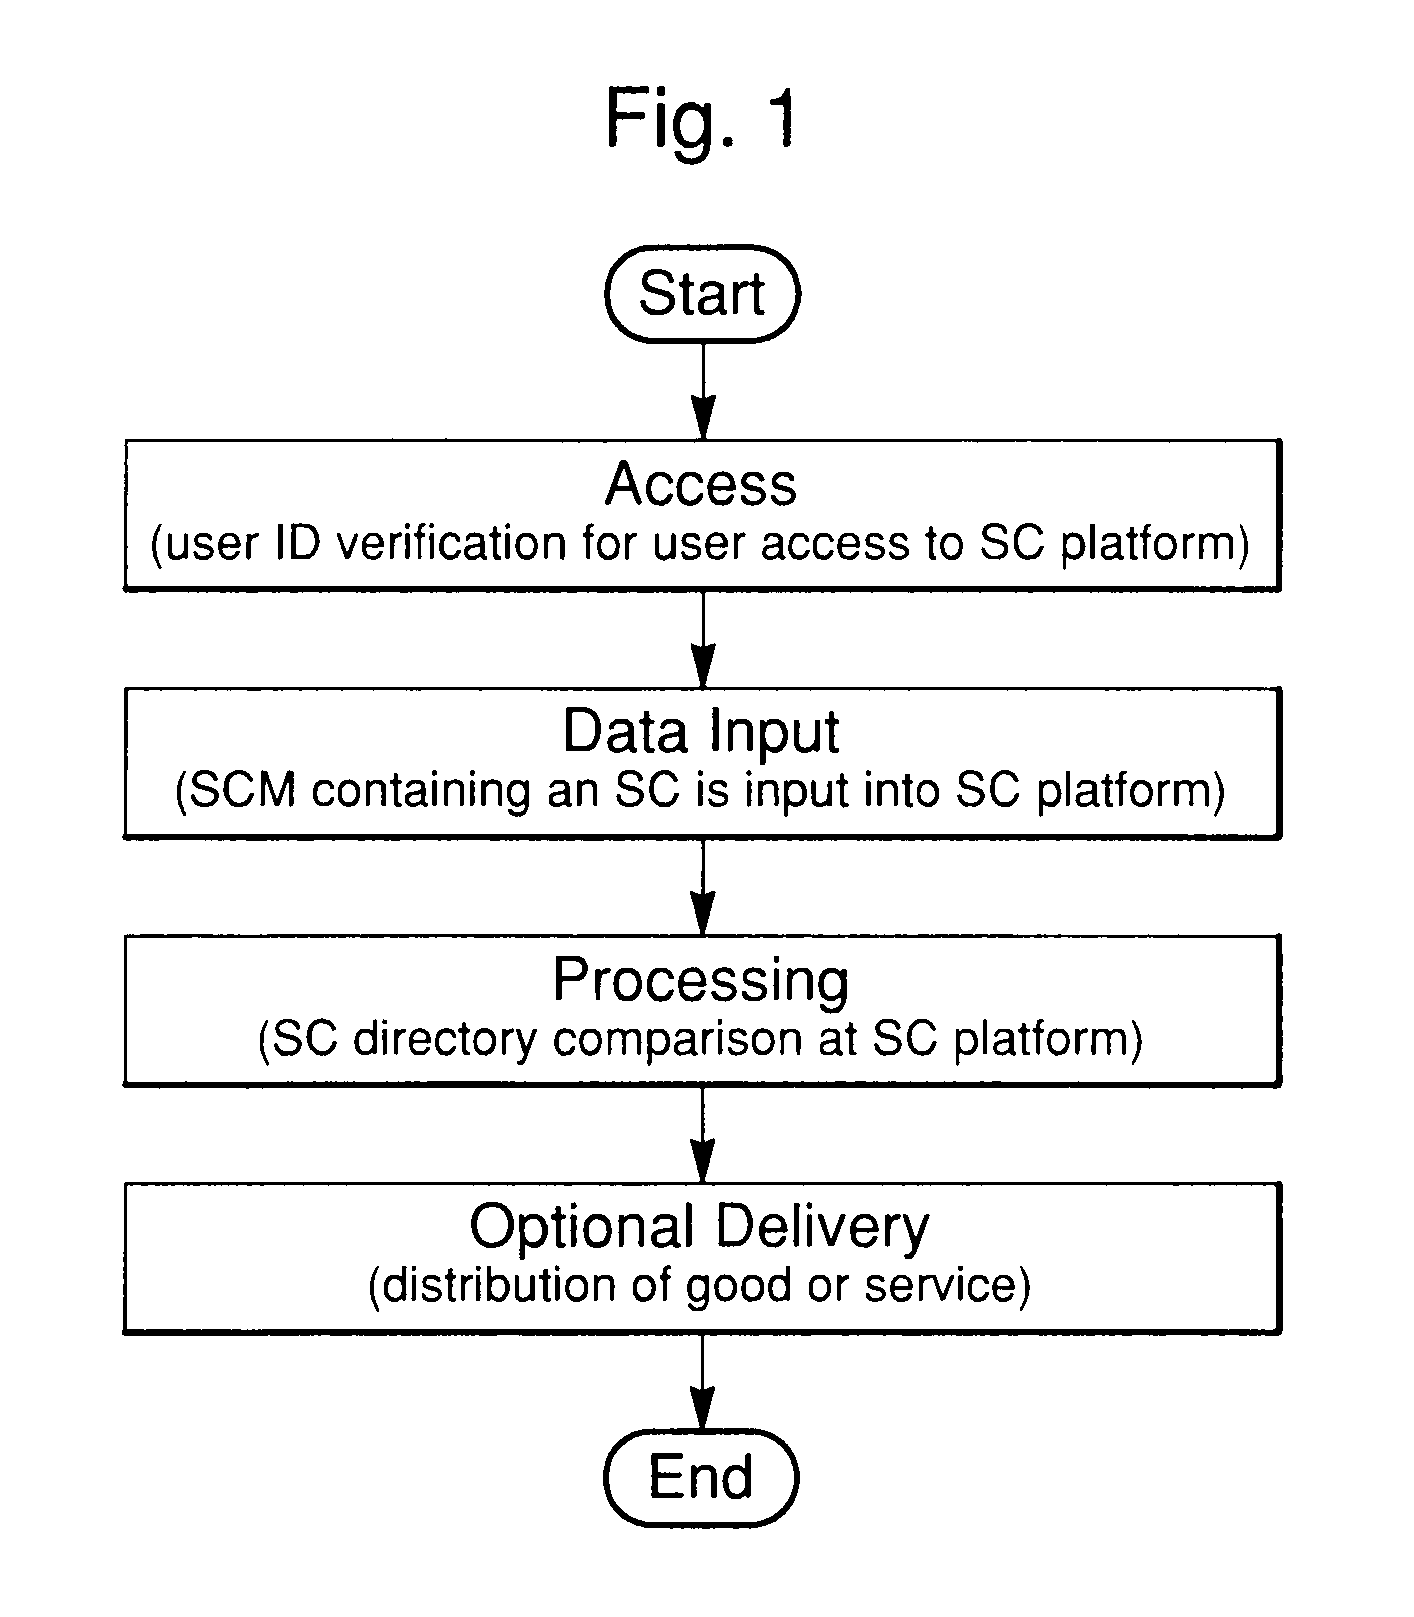 System and method for using symbol command language within a communications network via SMS or internet communications protocols